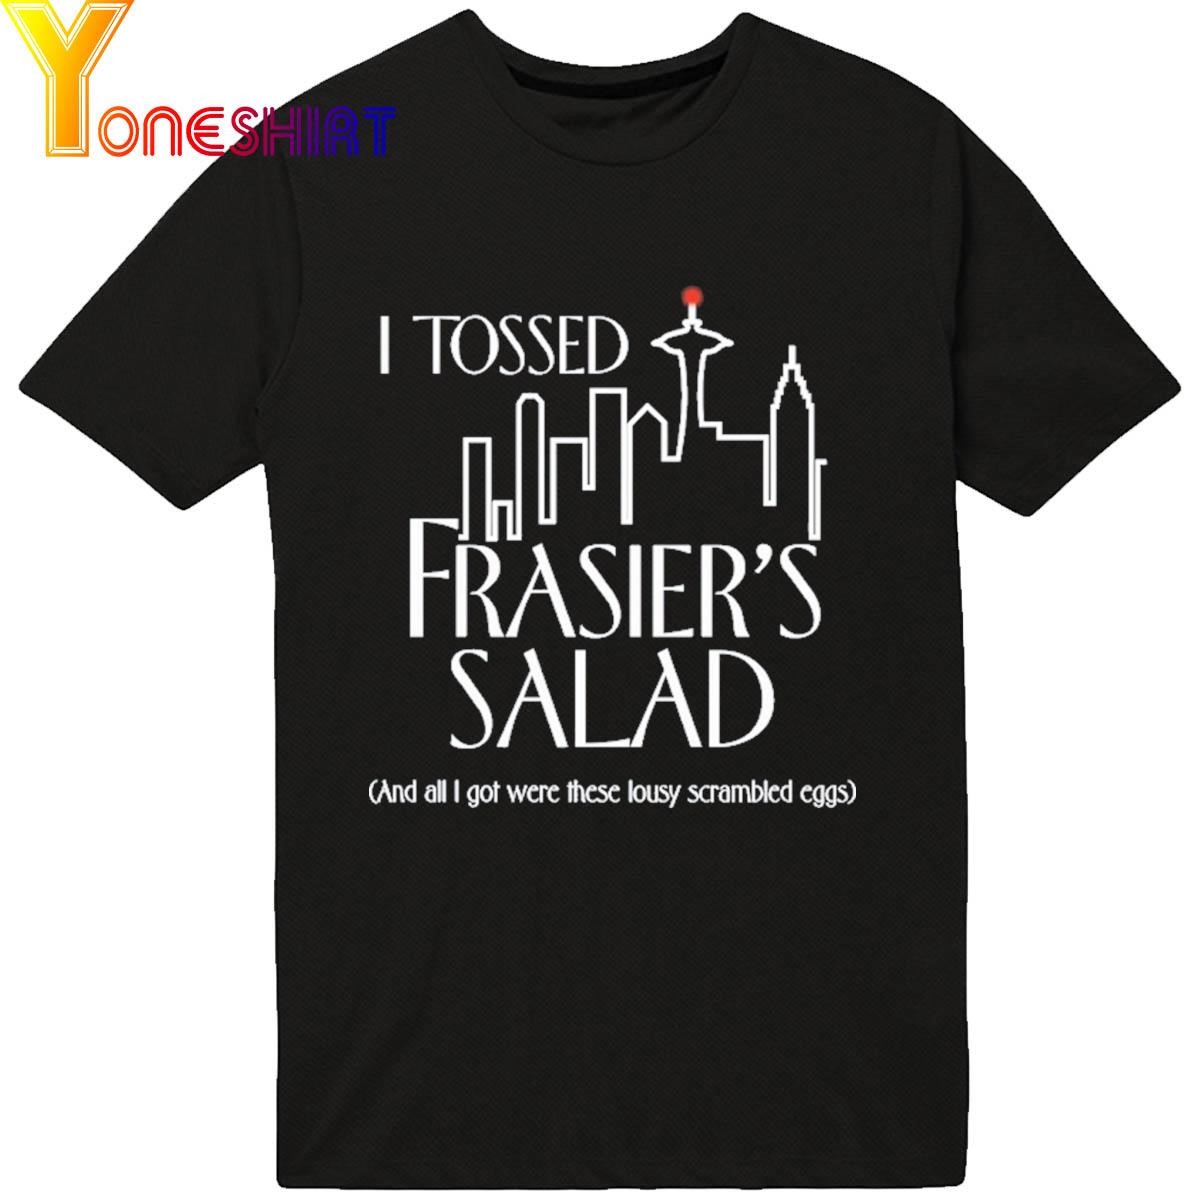 I Tossed Frasier's Salad And All I Got Were These Lousy Scrambled Eggs shirt